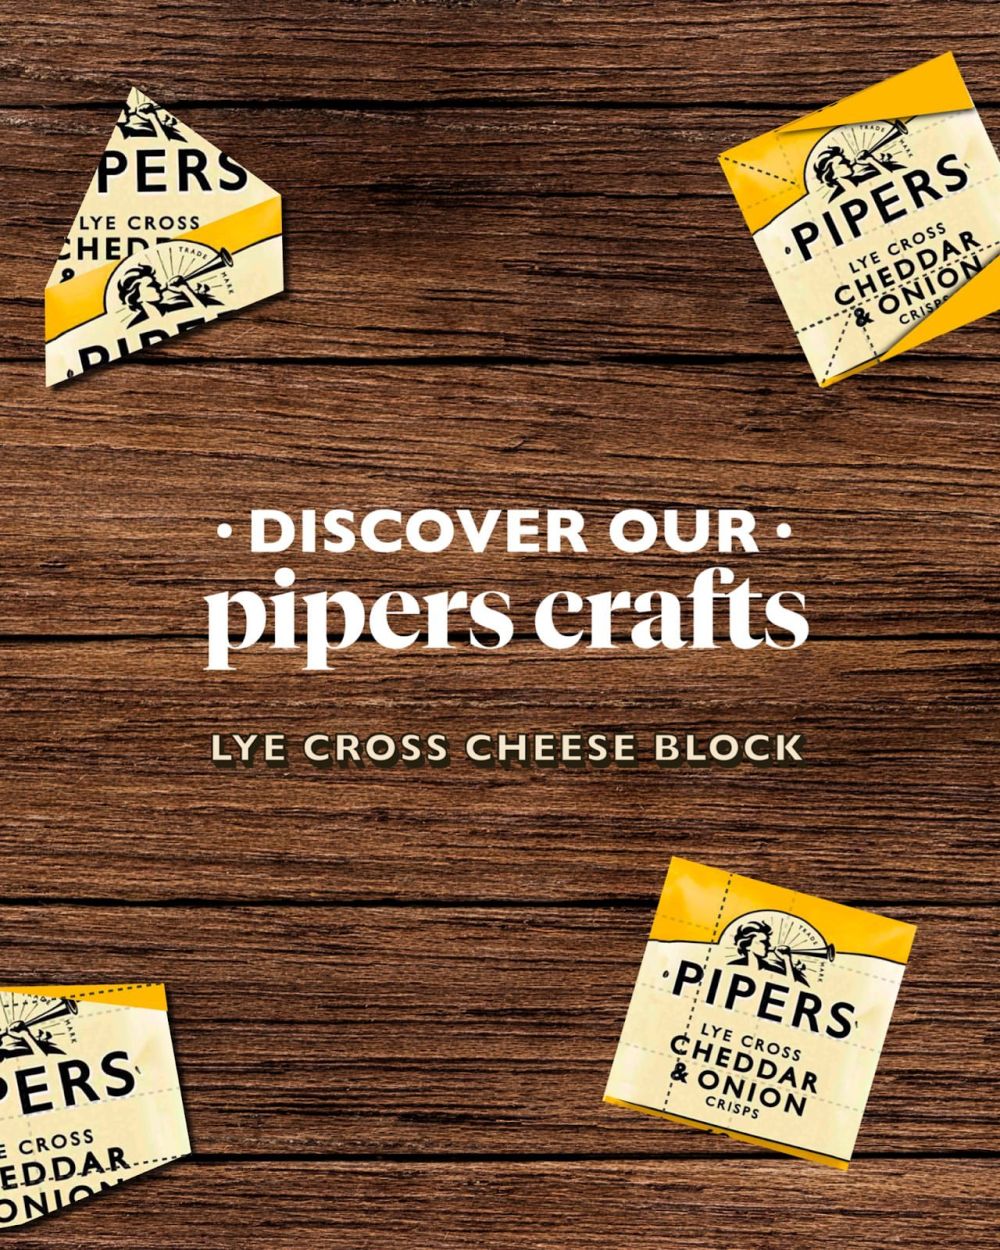 Social media poster advertising Pipers Crafts to make a Lye Cross Cheese block with origami.